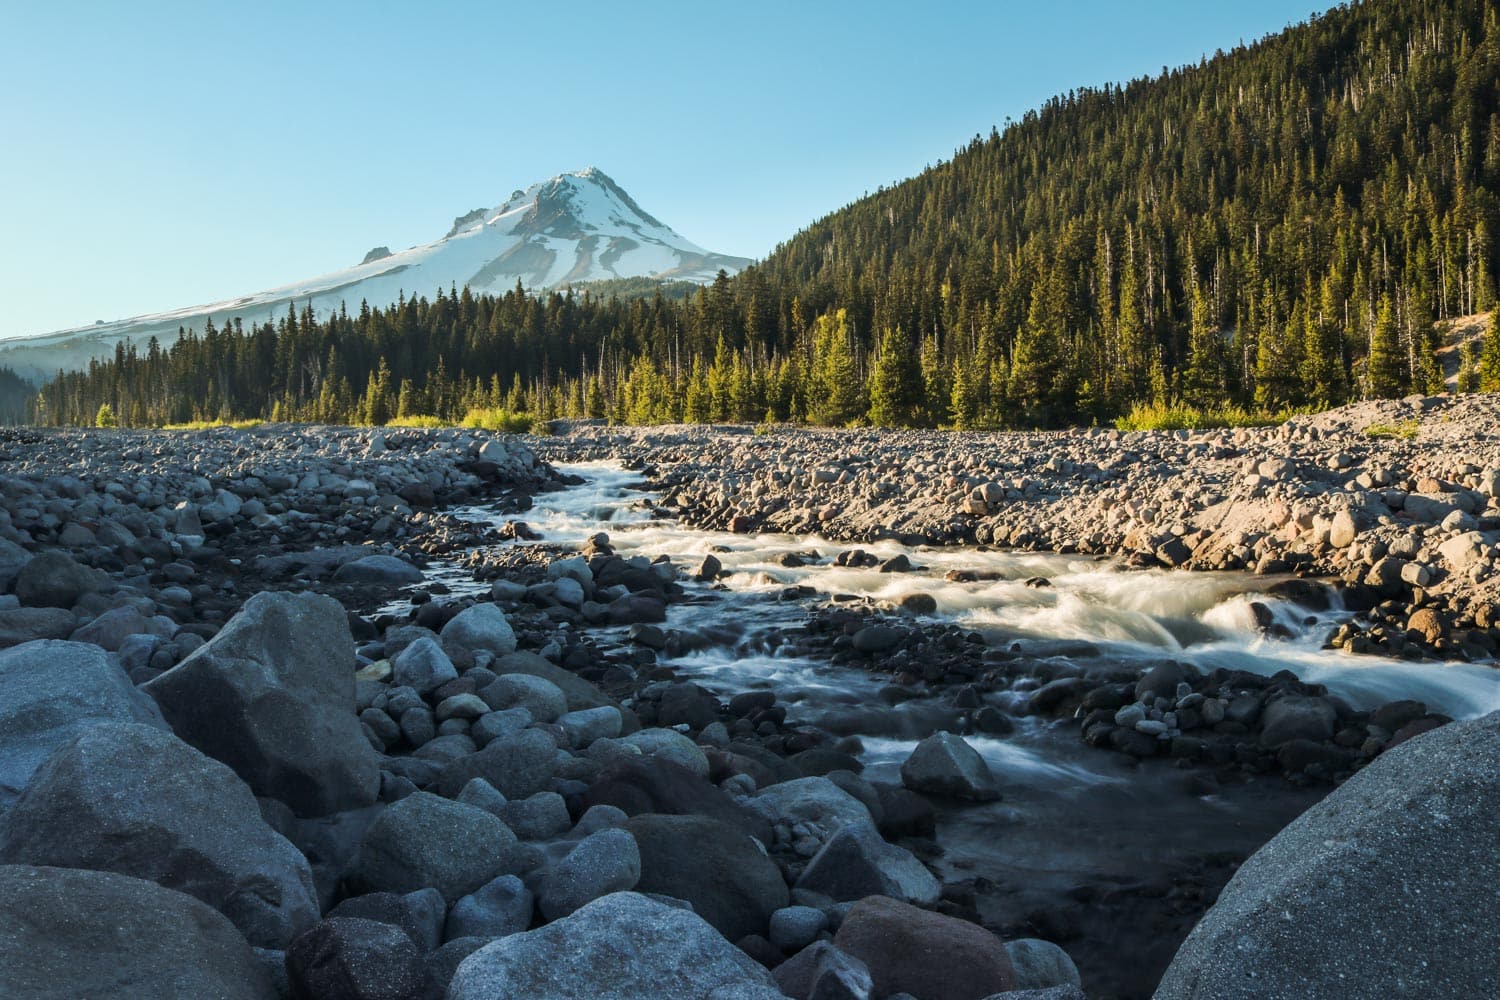 White River, forest and boulders in Mount Hood National Forest - Best Places to Visit Near Portland, Oregon